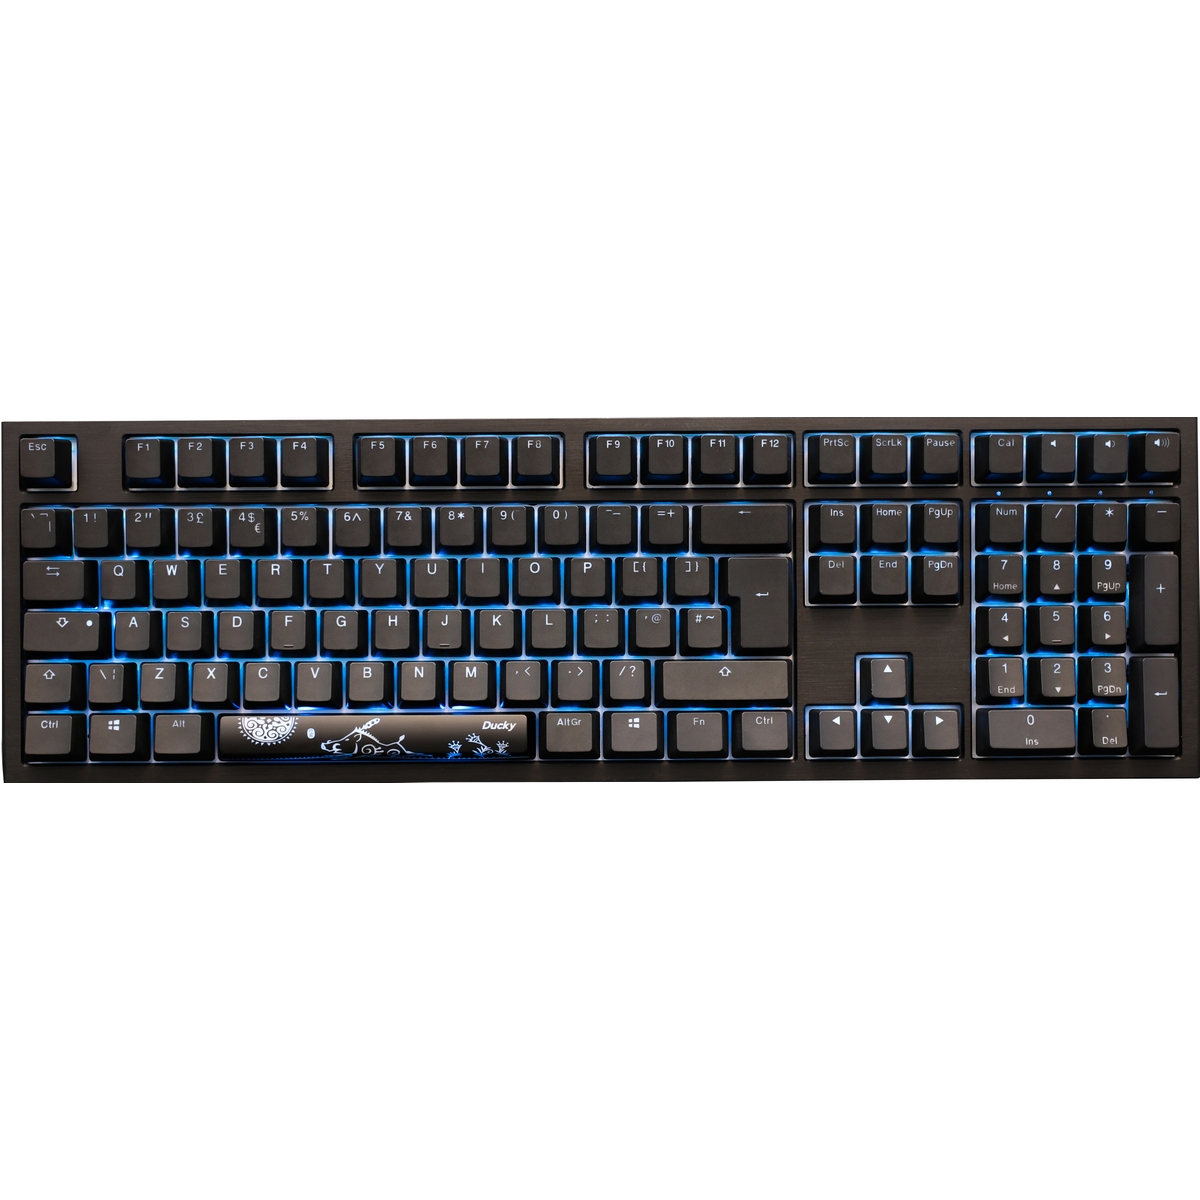 Ducky - Ducky Shine 7 Blackout USB RGB Backlit Gaming Keyboard Brown Cherry MX Switches UK Layout